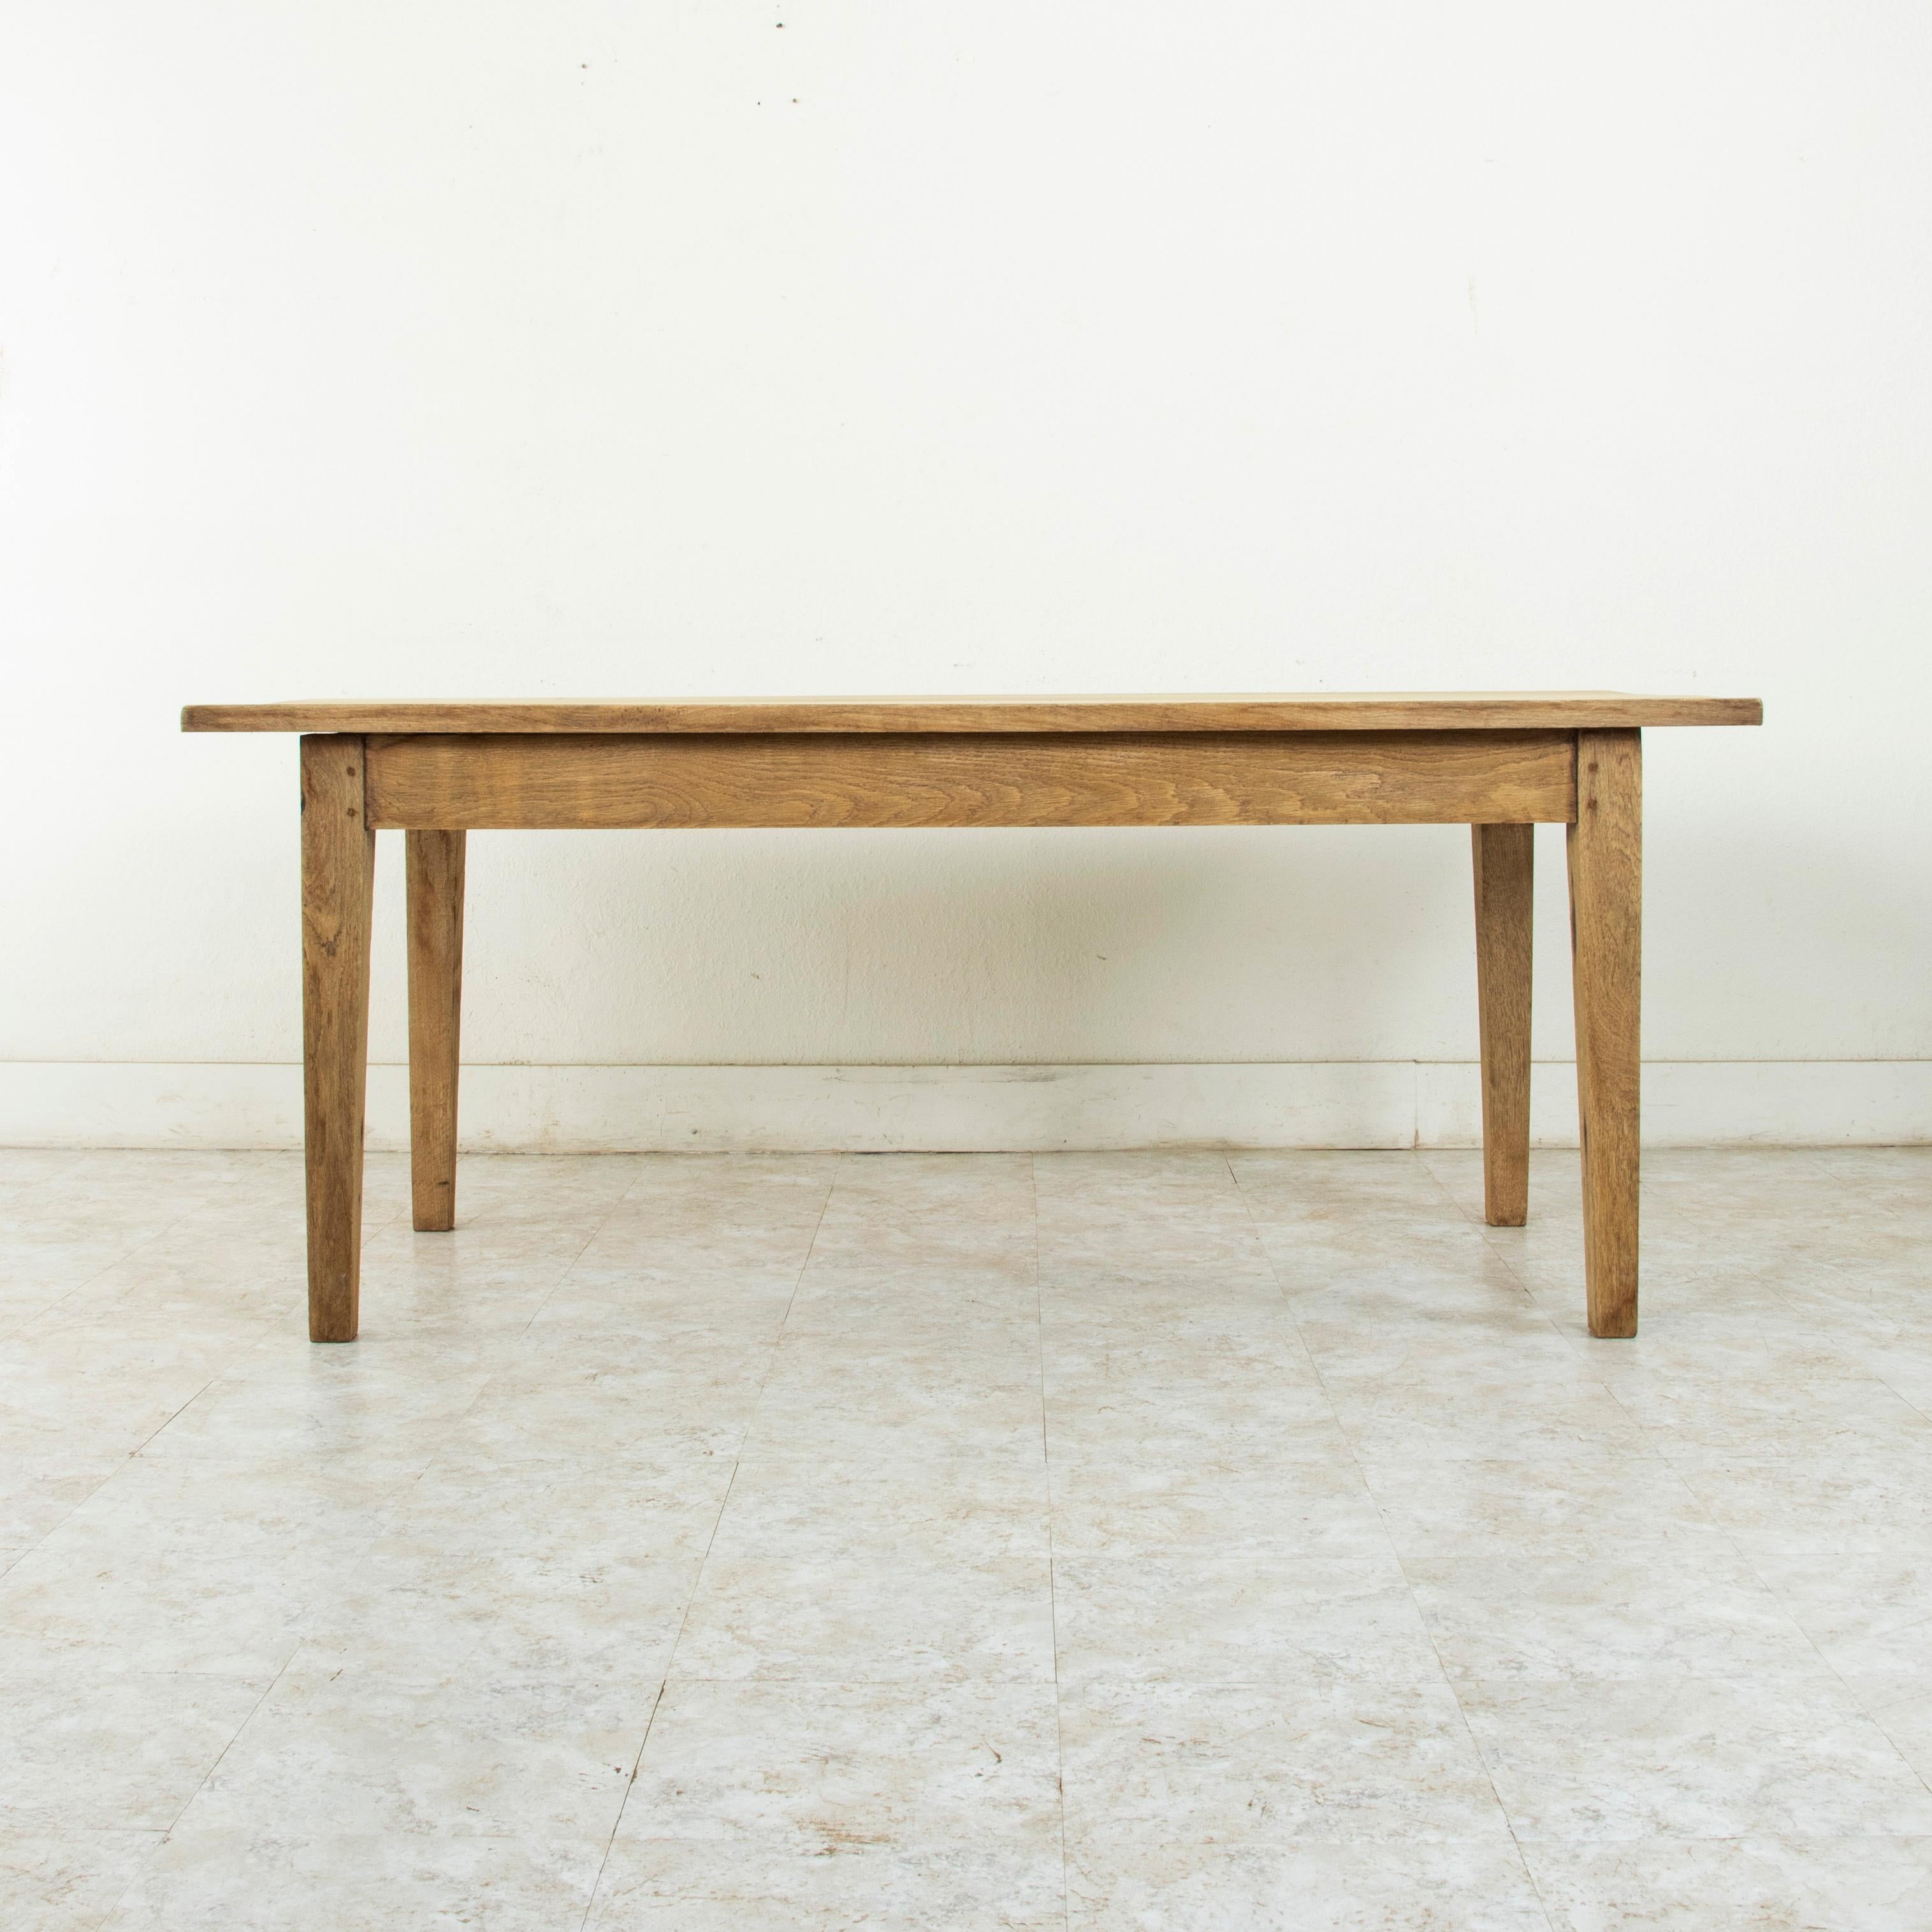 French Hand Pegged Oak Farm Table or Dining Table circa 1900, Seats Six 1